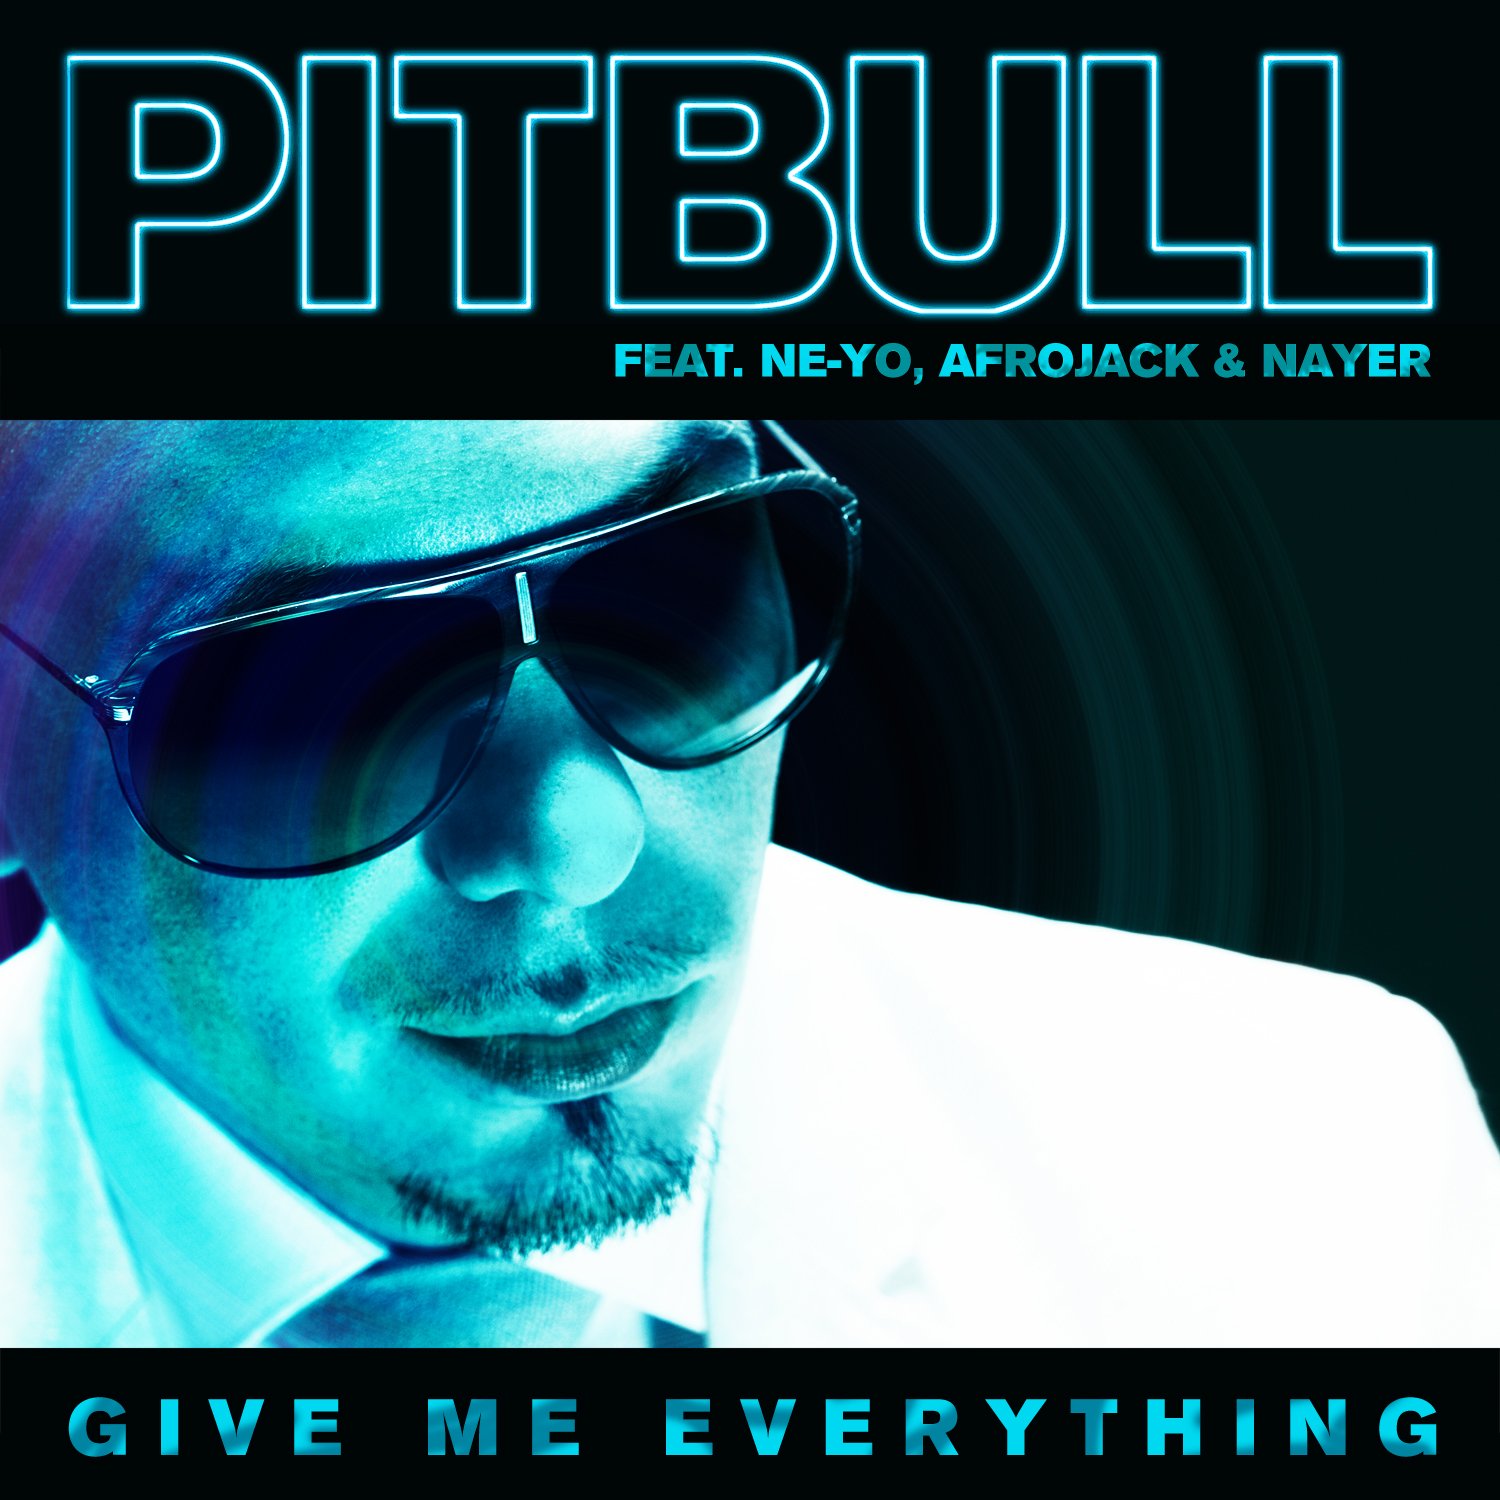 Pitbull_Give-Me-Everything